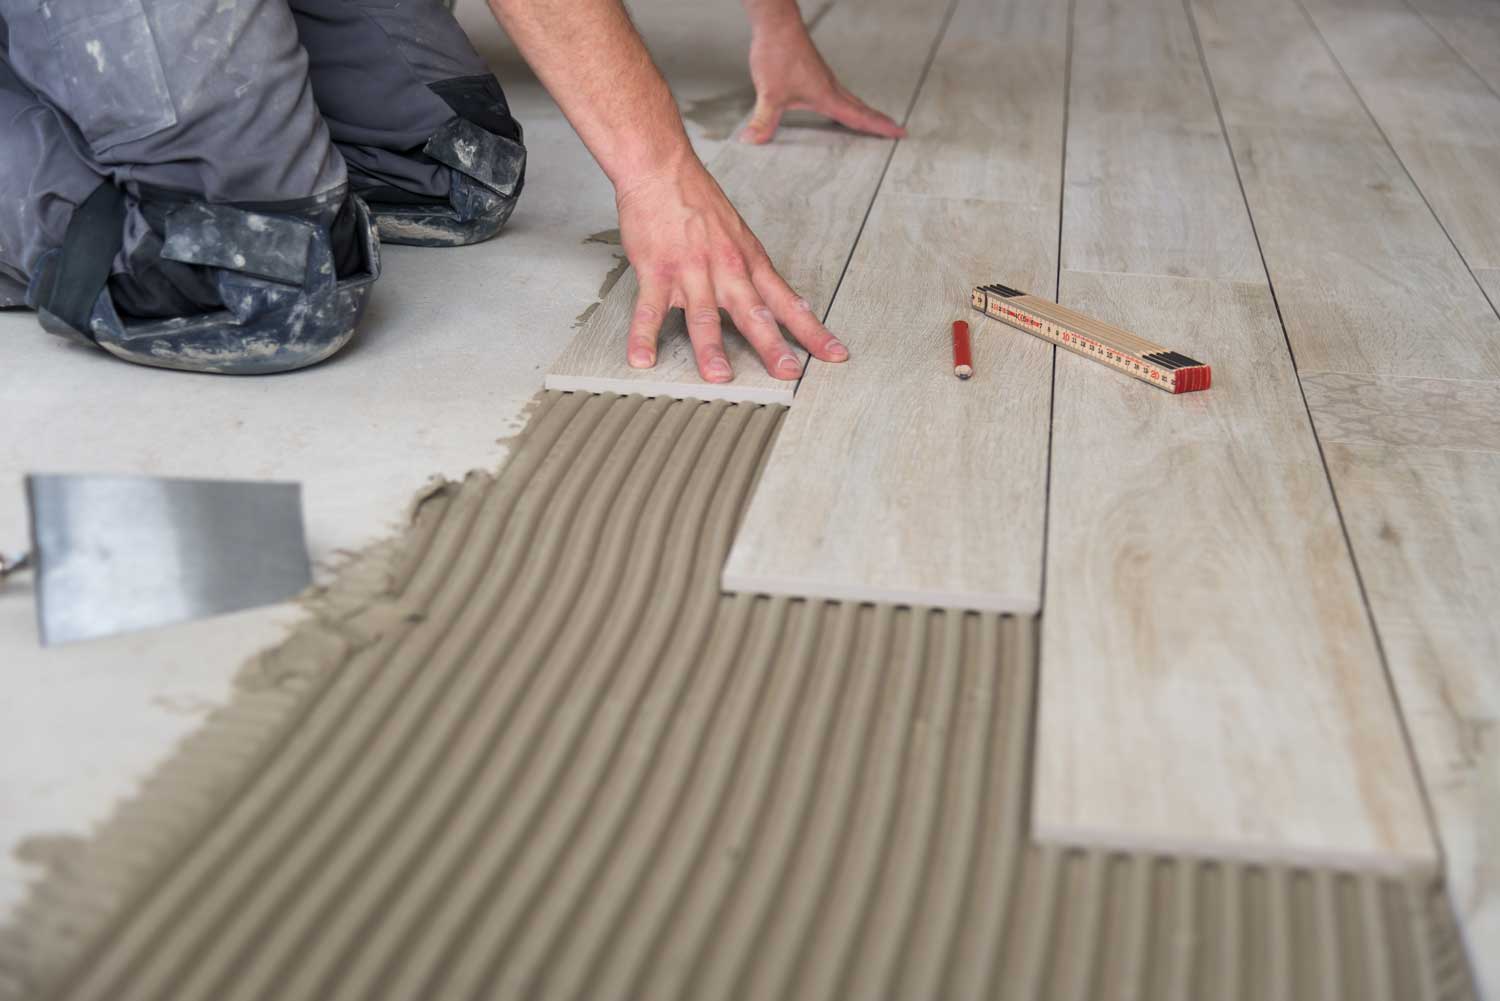 At Footprints Floors, our tile contractors in Denver get the job done - just read the reviews!